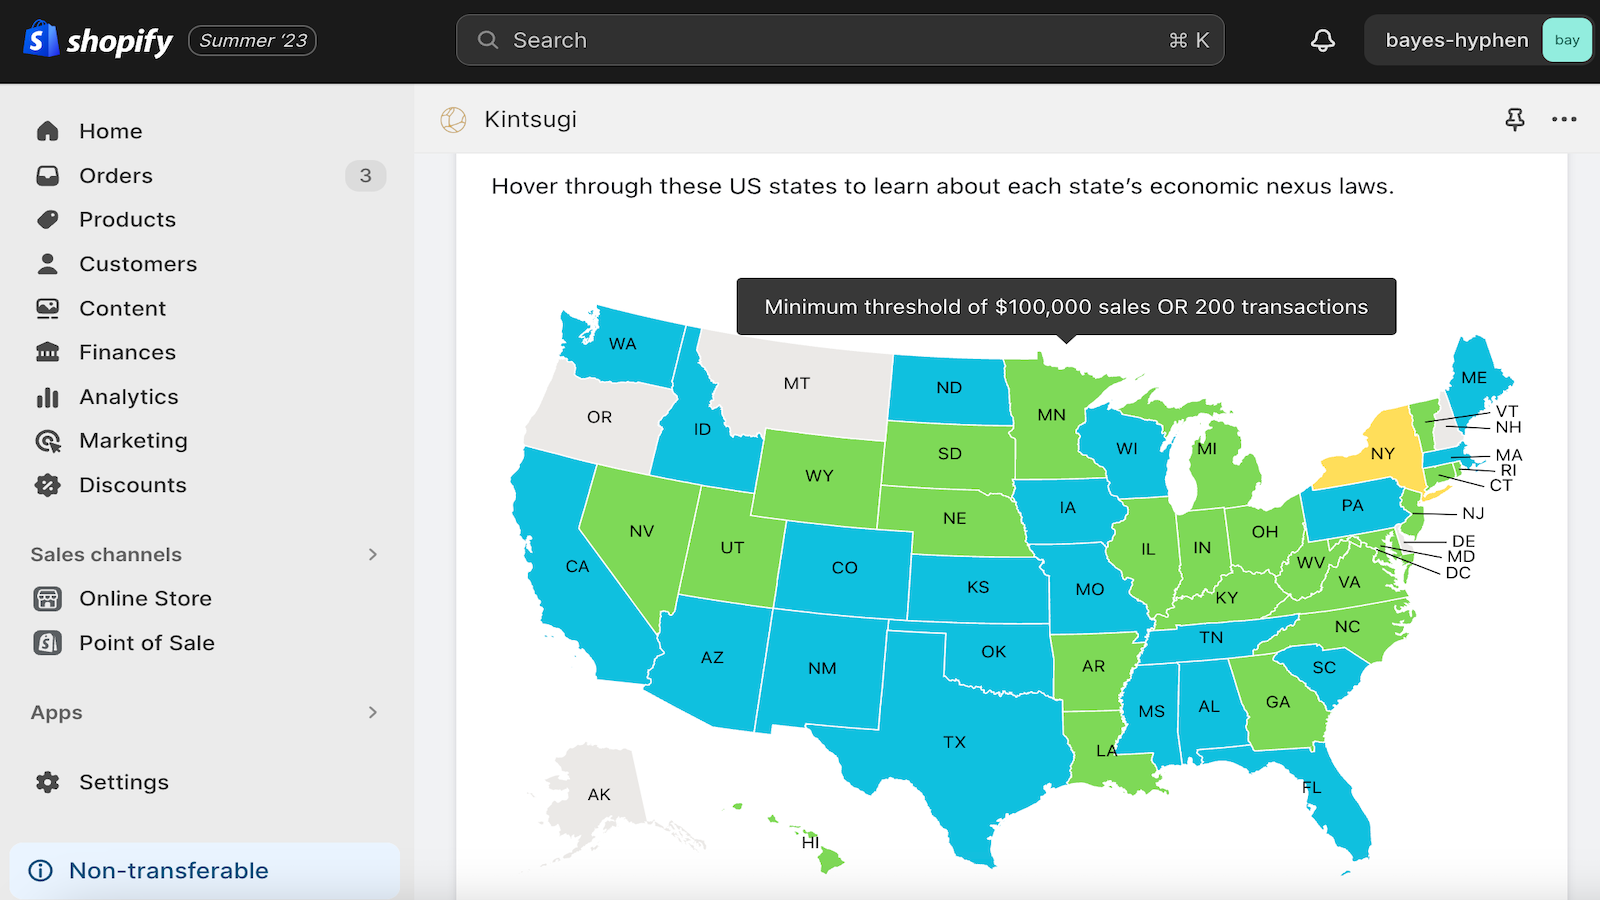 Easy to see dollar and transaction thresholds for every state